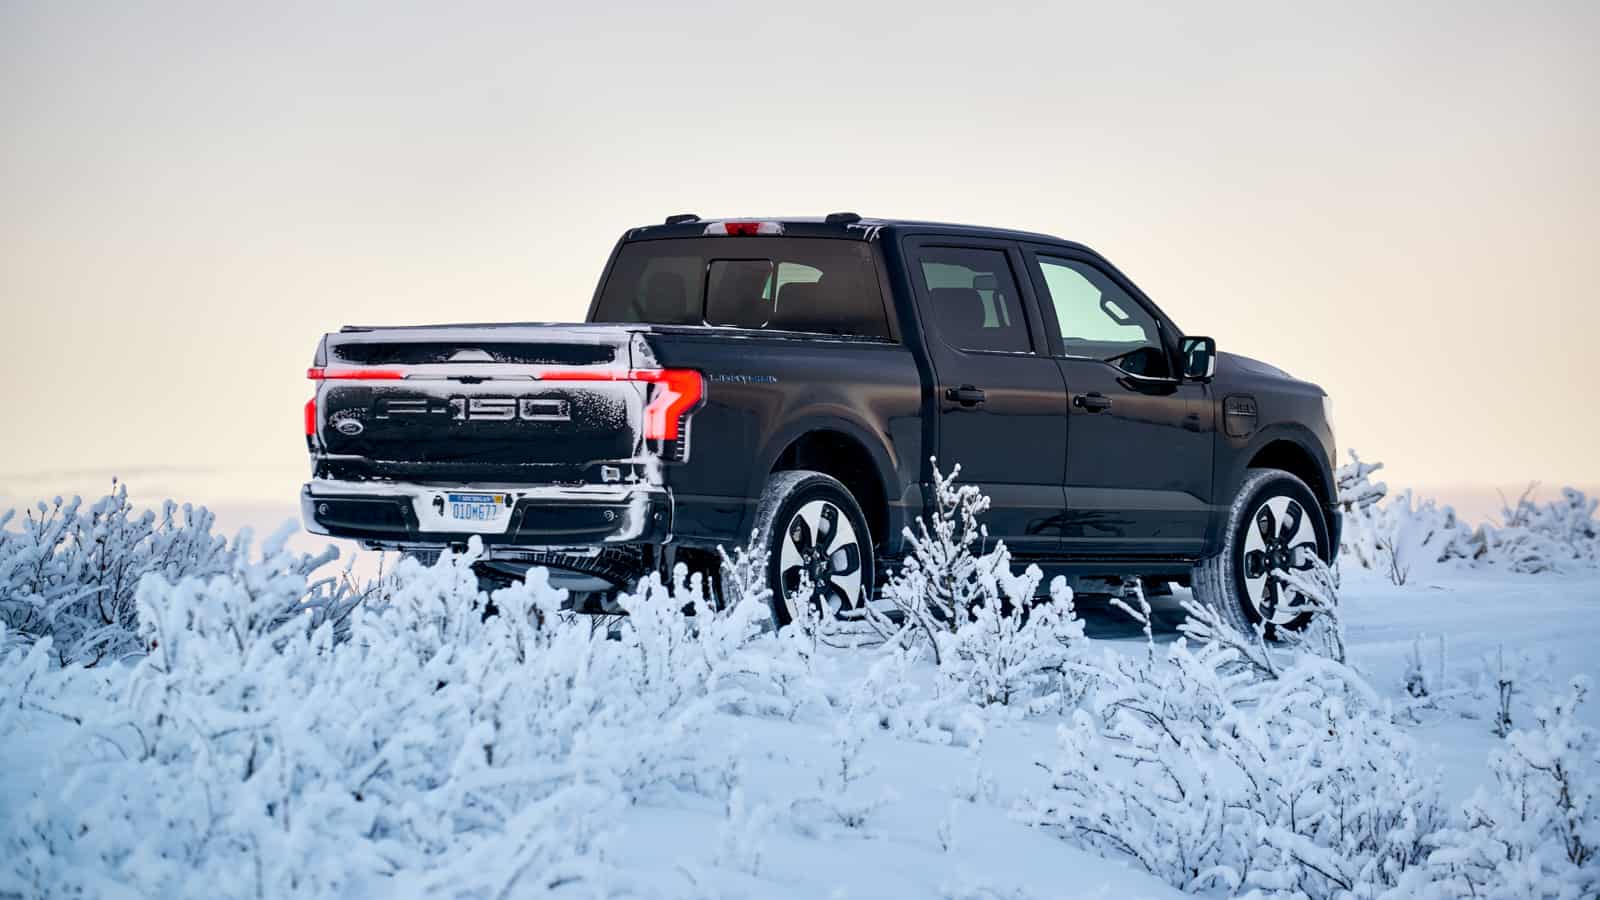 Image showcasing black 2022 Ford F-150 Lighting EV truck in snow and cold weather